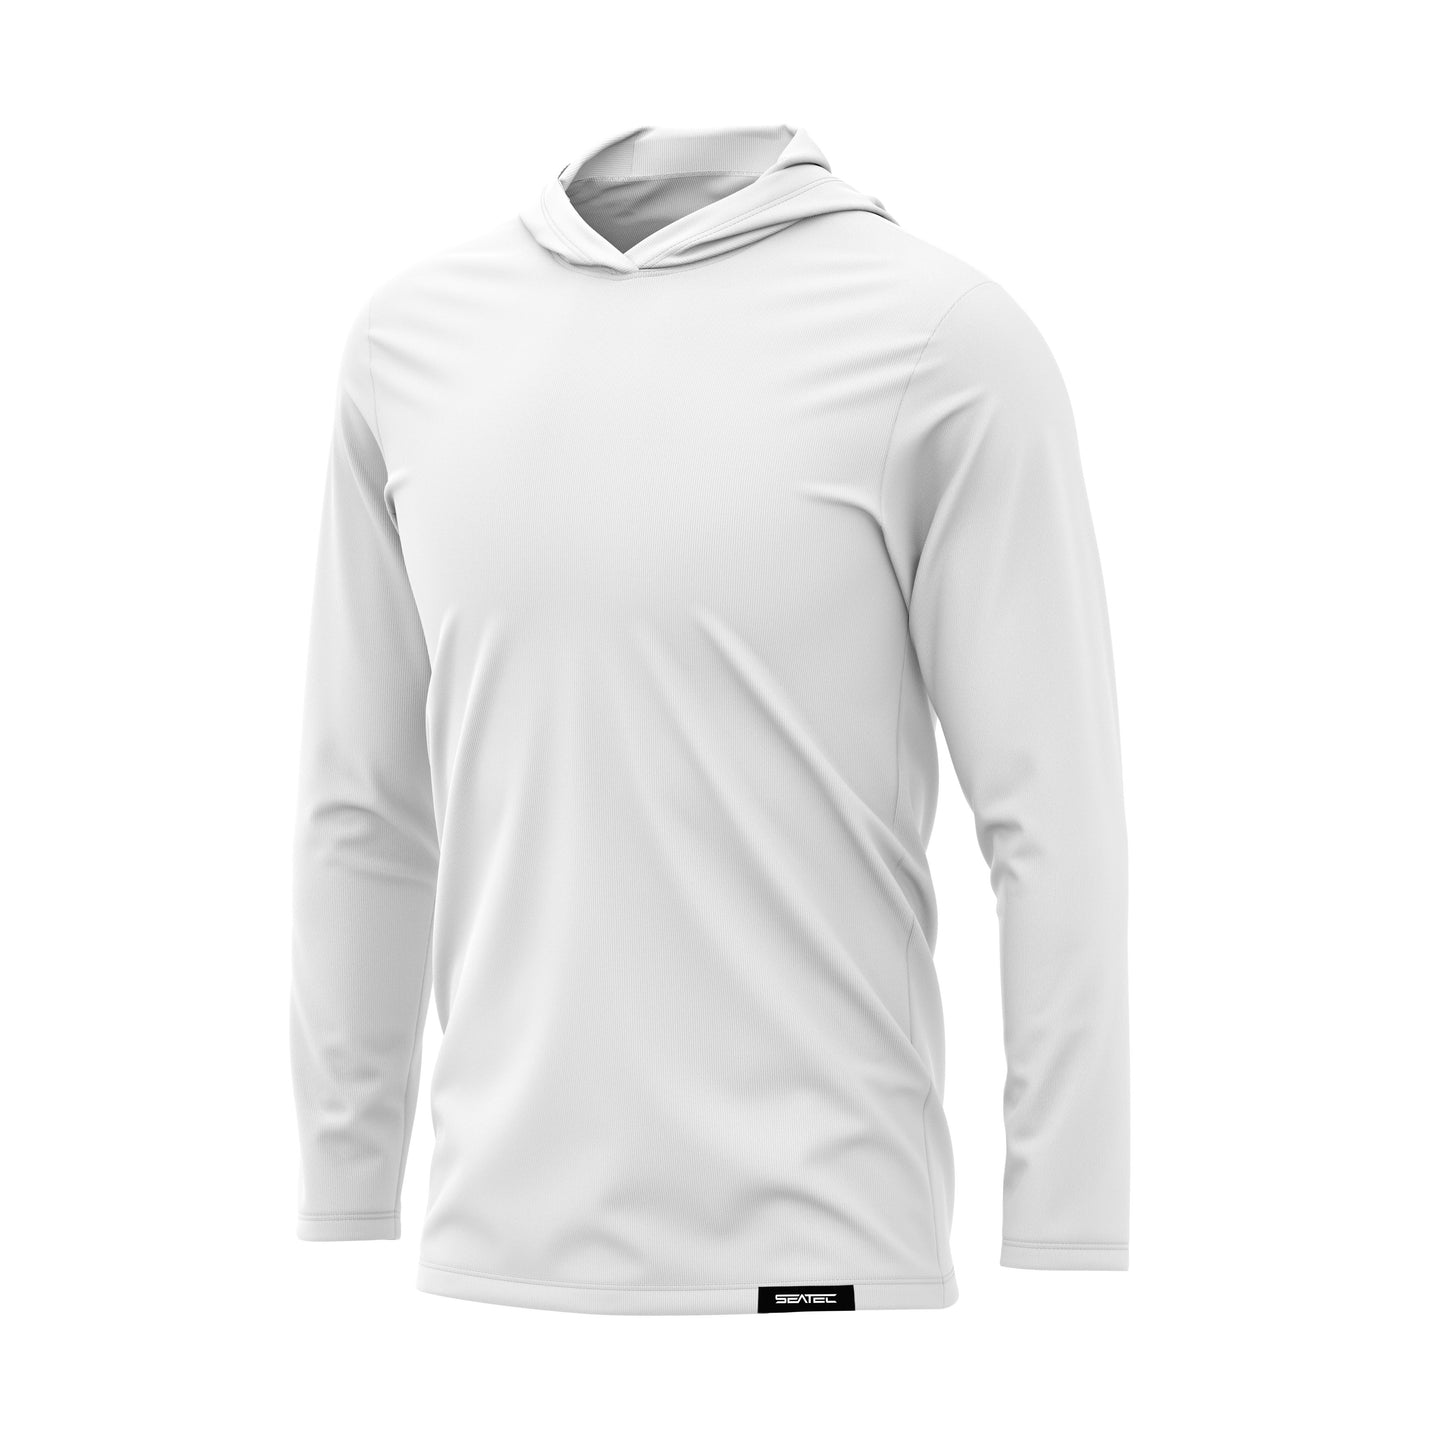 MEN'S ACTIVE | TITANIUM WHITE | LS HOODED – Seatec Outfitters